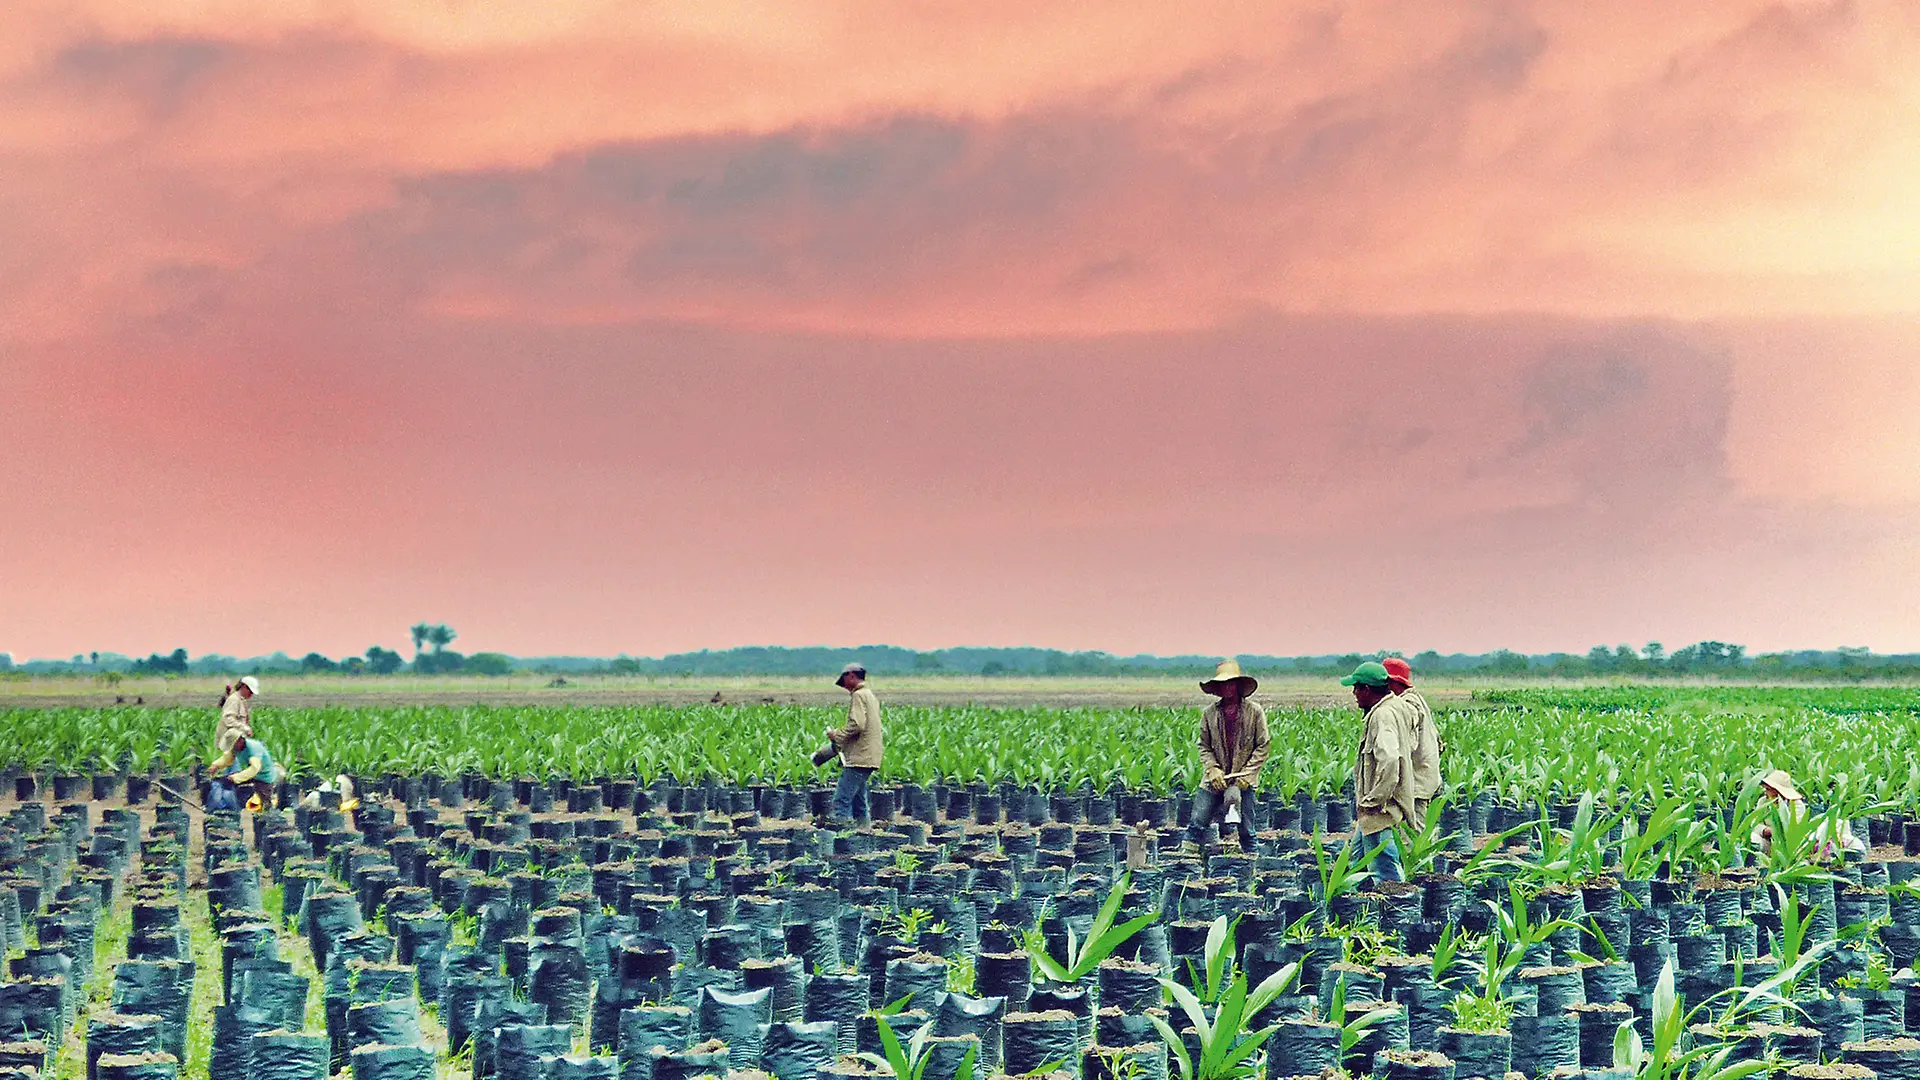 Farmers work in a field, cultivating palm oil